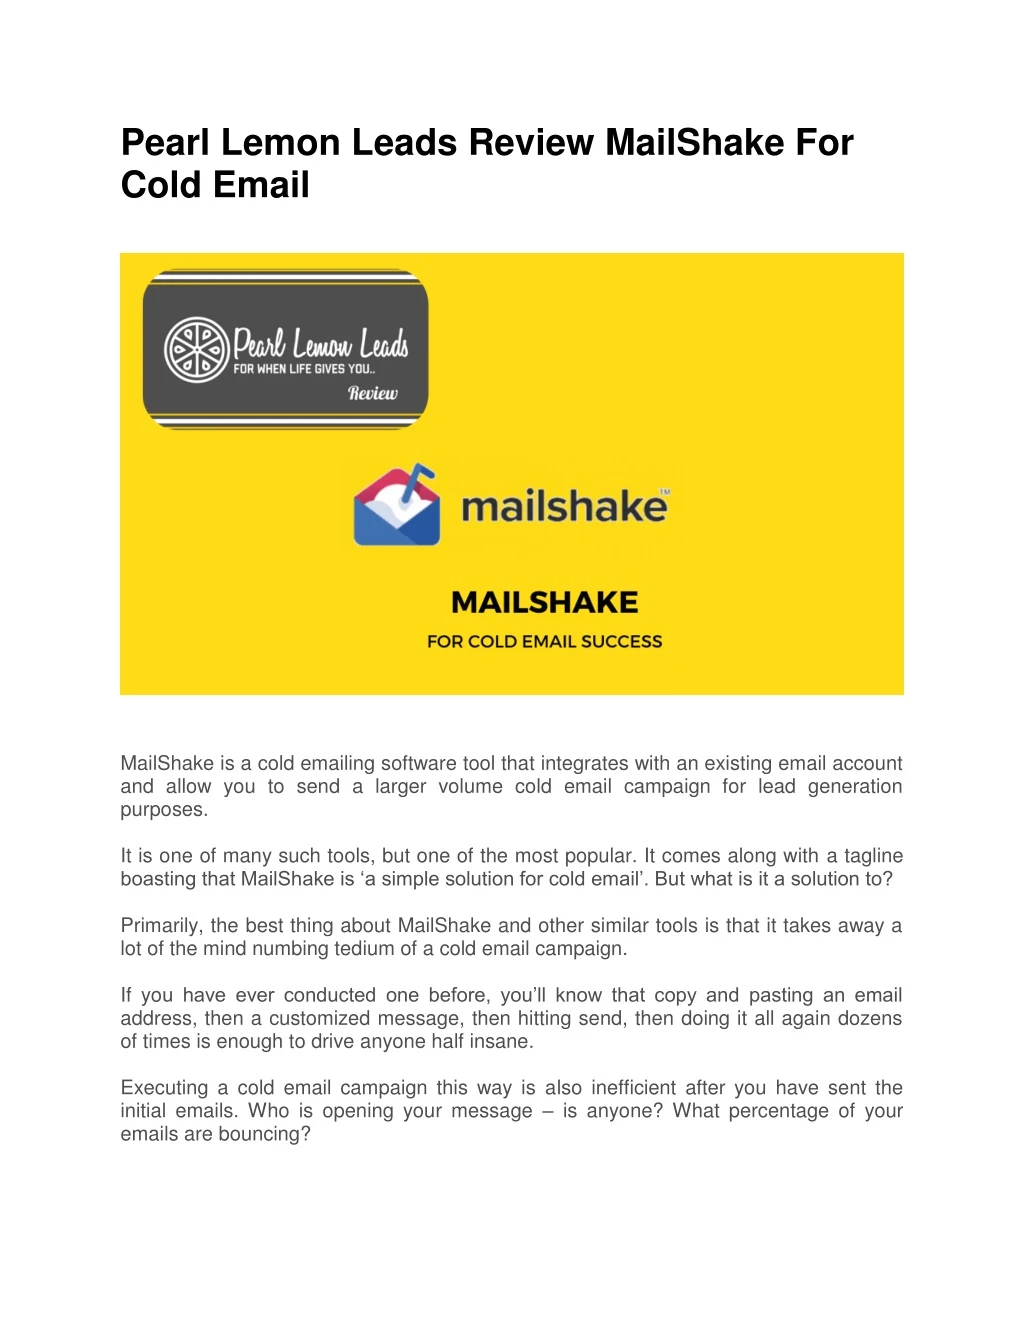 pearl lemon leads review mailshake for cold email